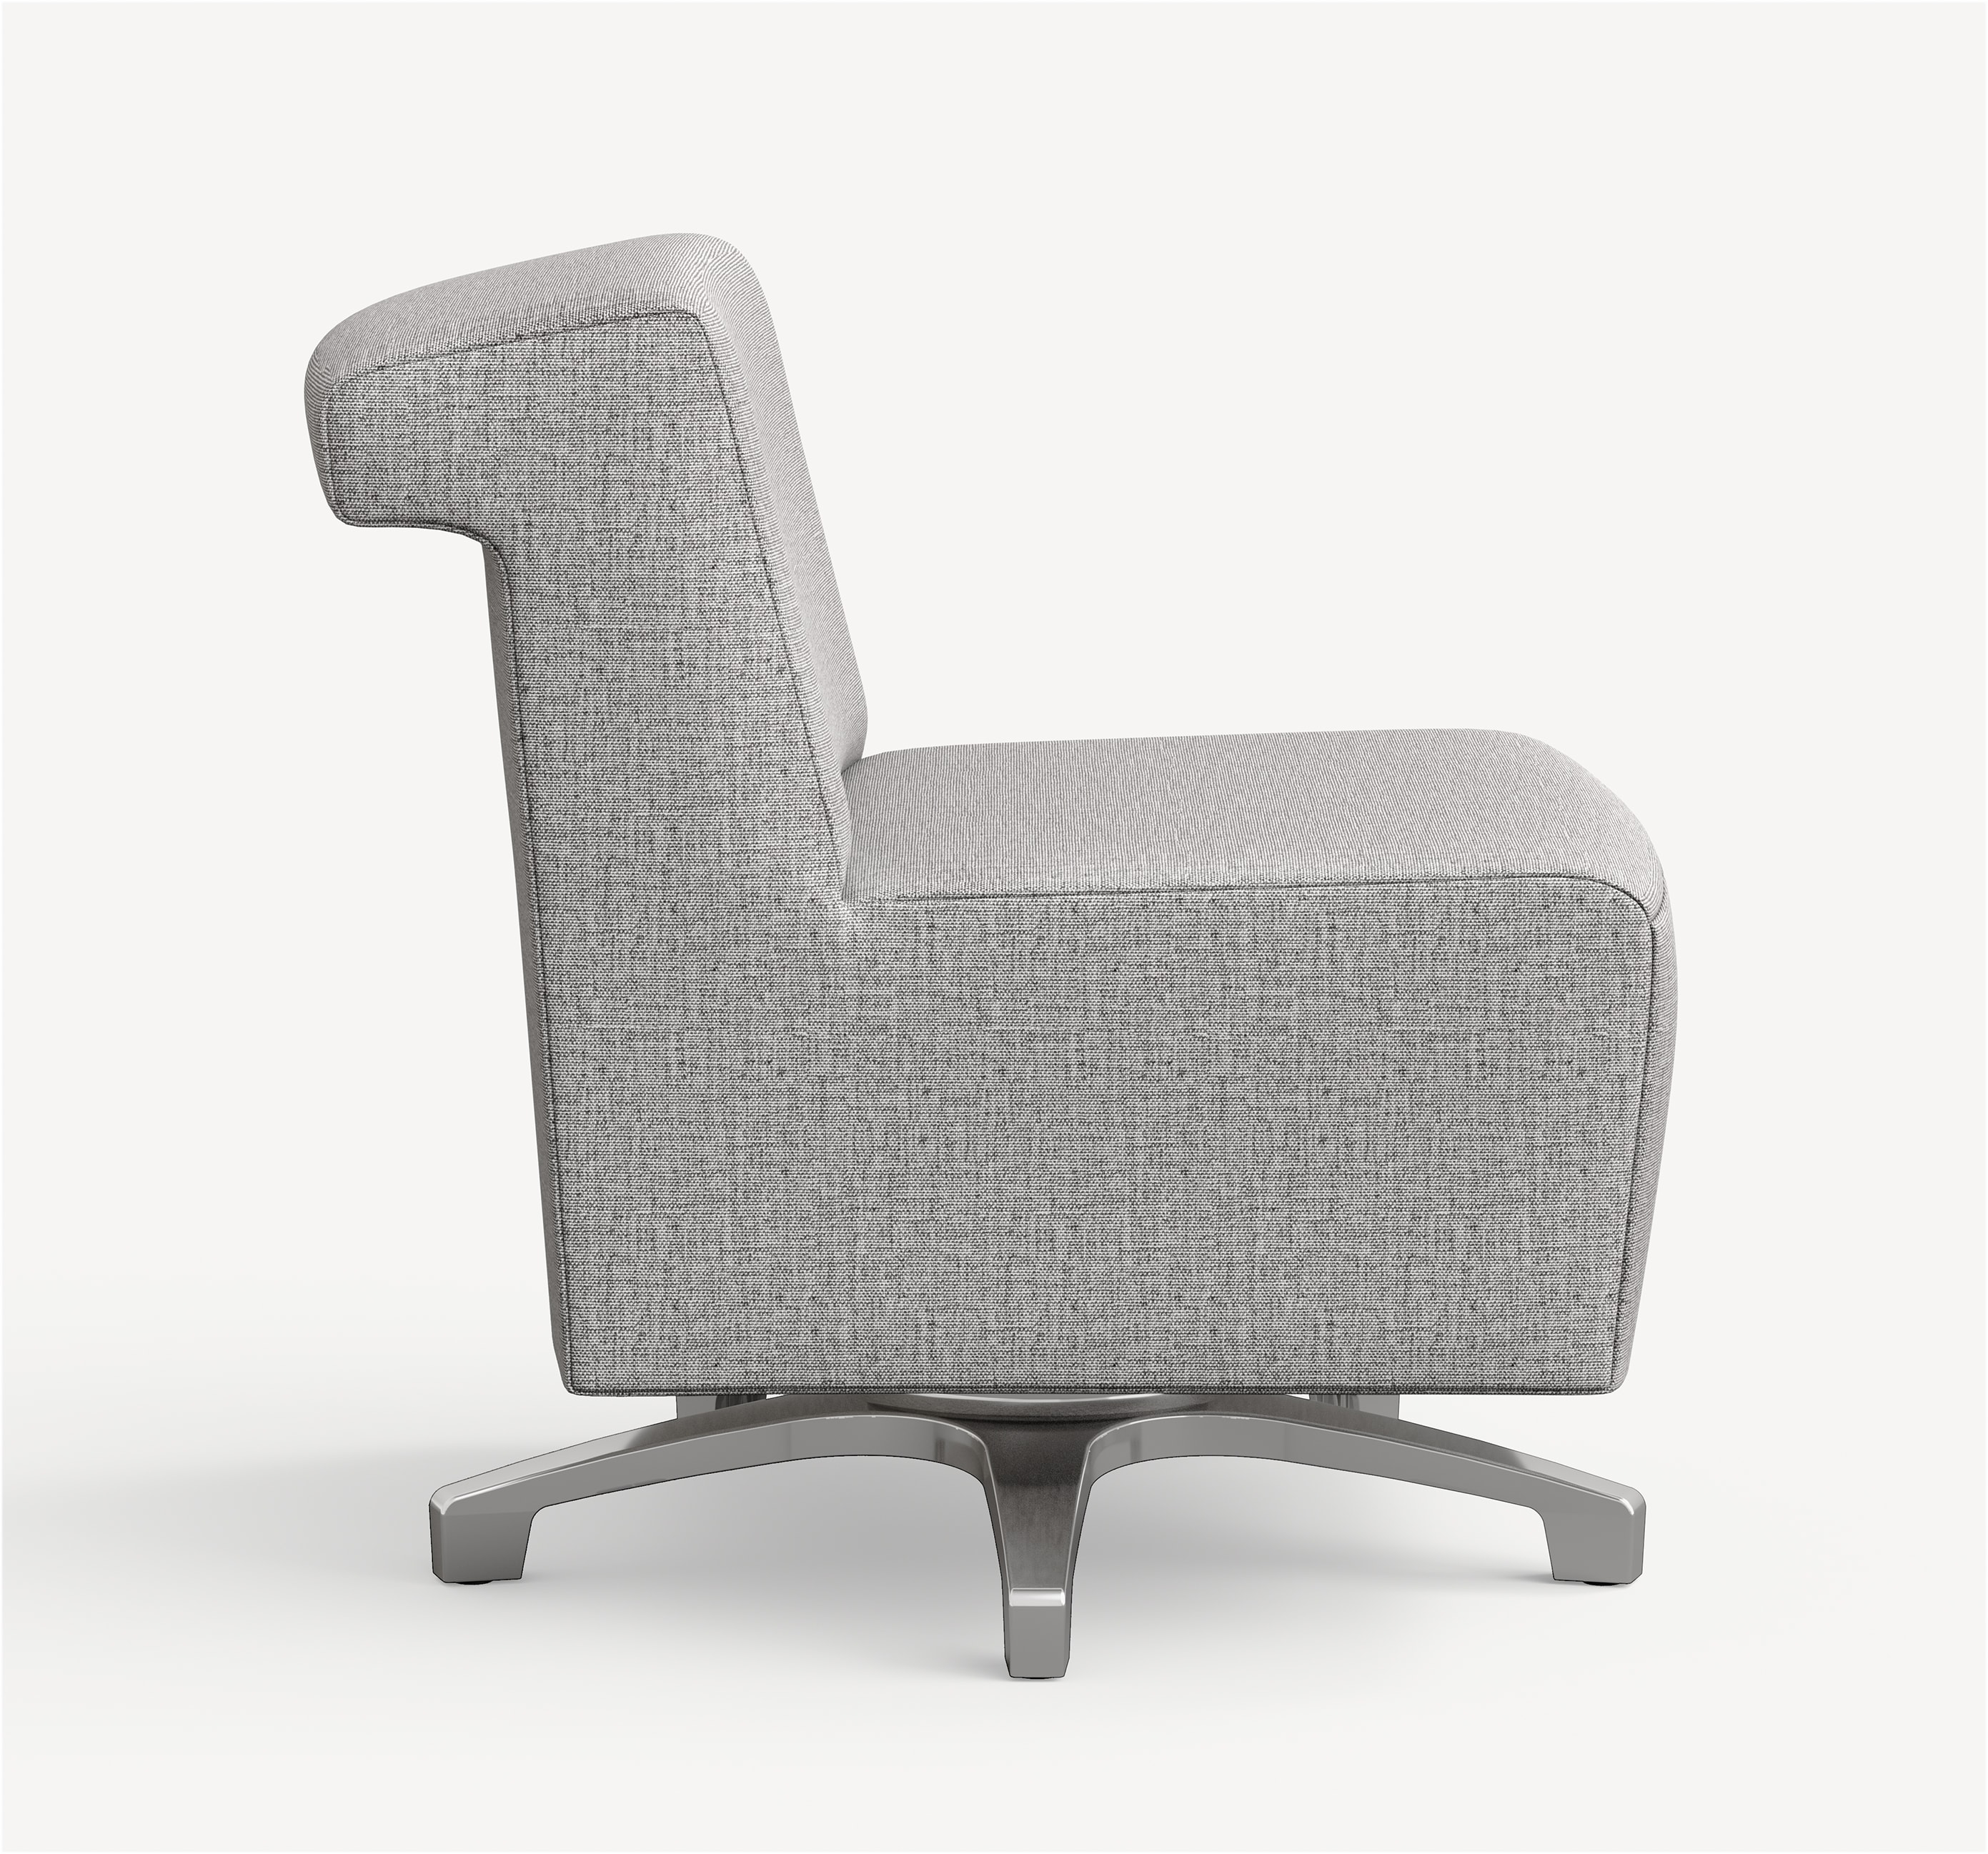 Side view of the Allsteel Linger swivel lounge chair with aluminum base and light grey upholstery.